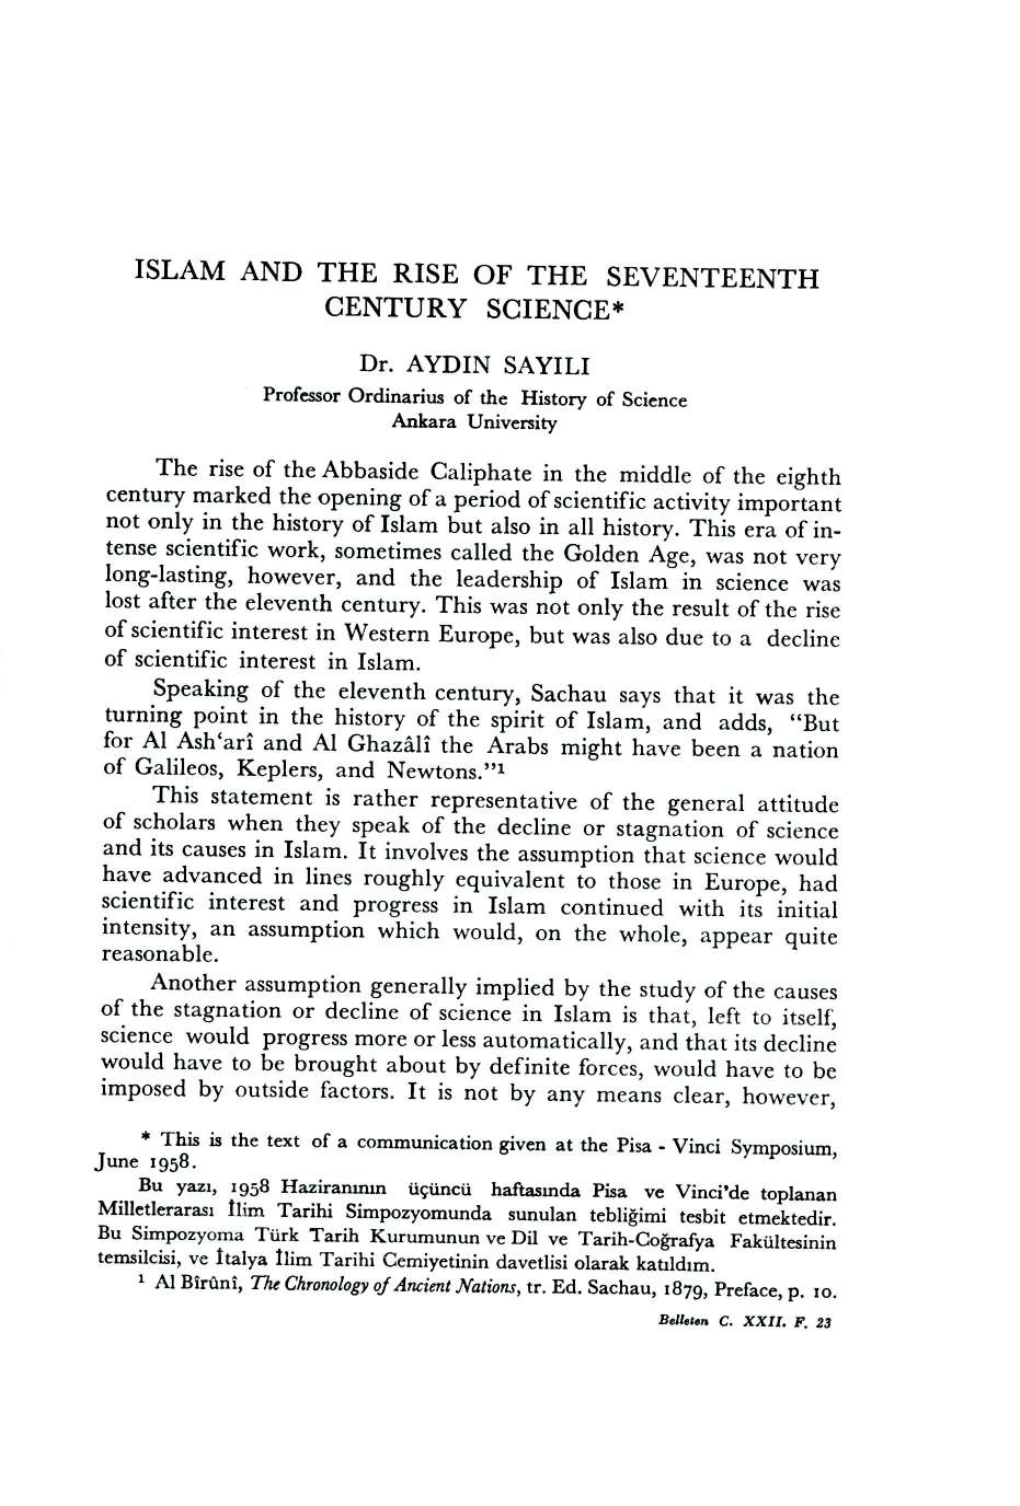 Islam and the Rise of the Seventeenth Century Science*